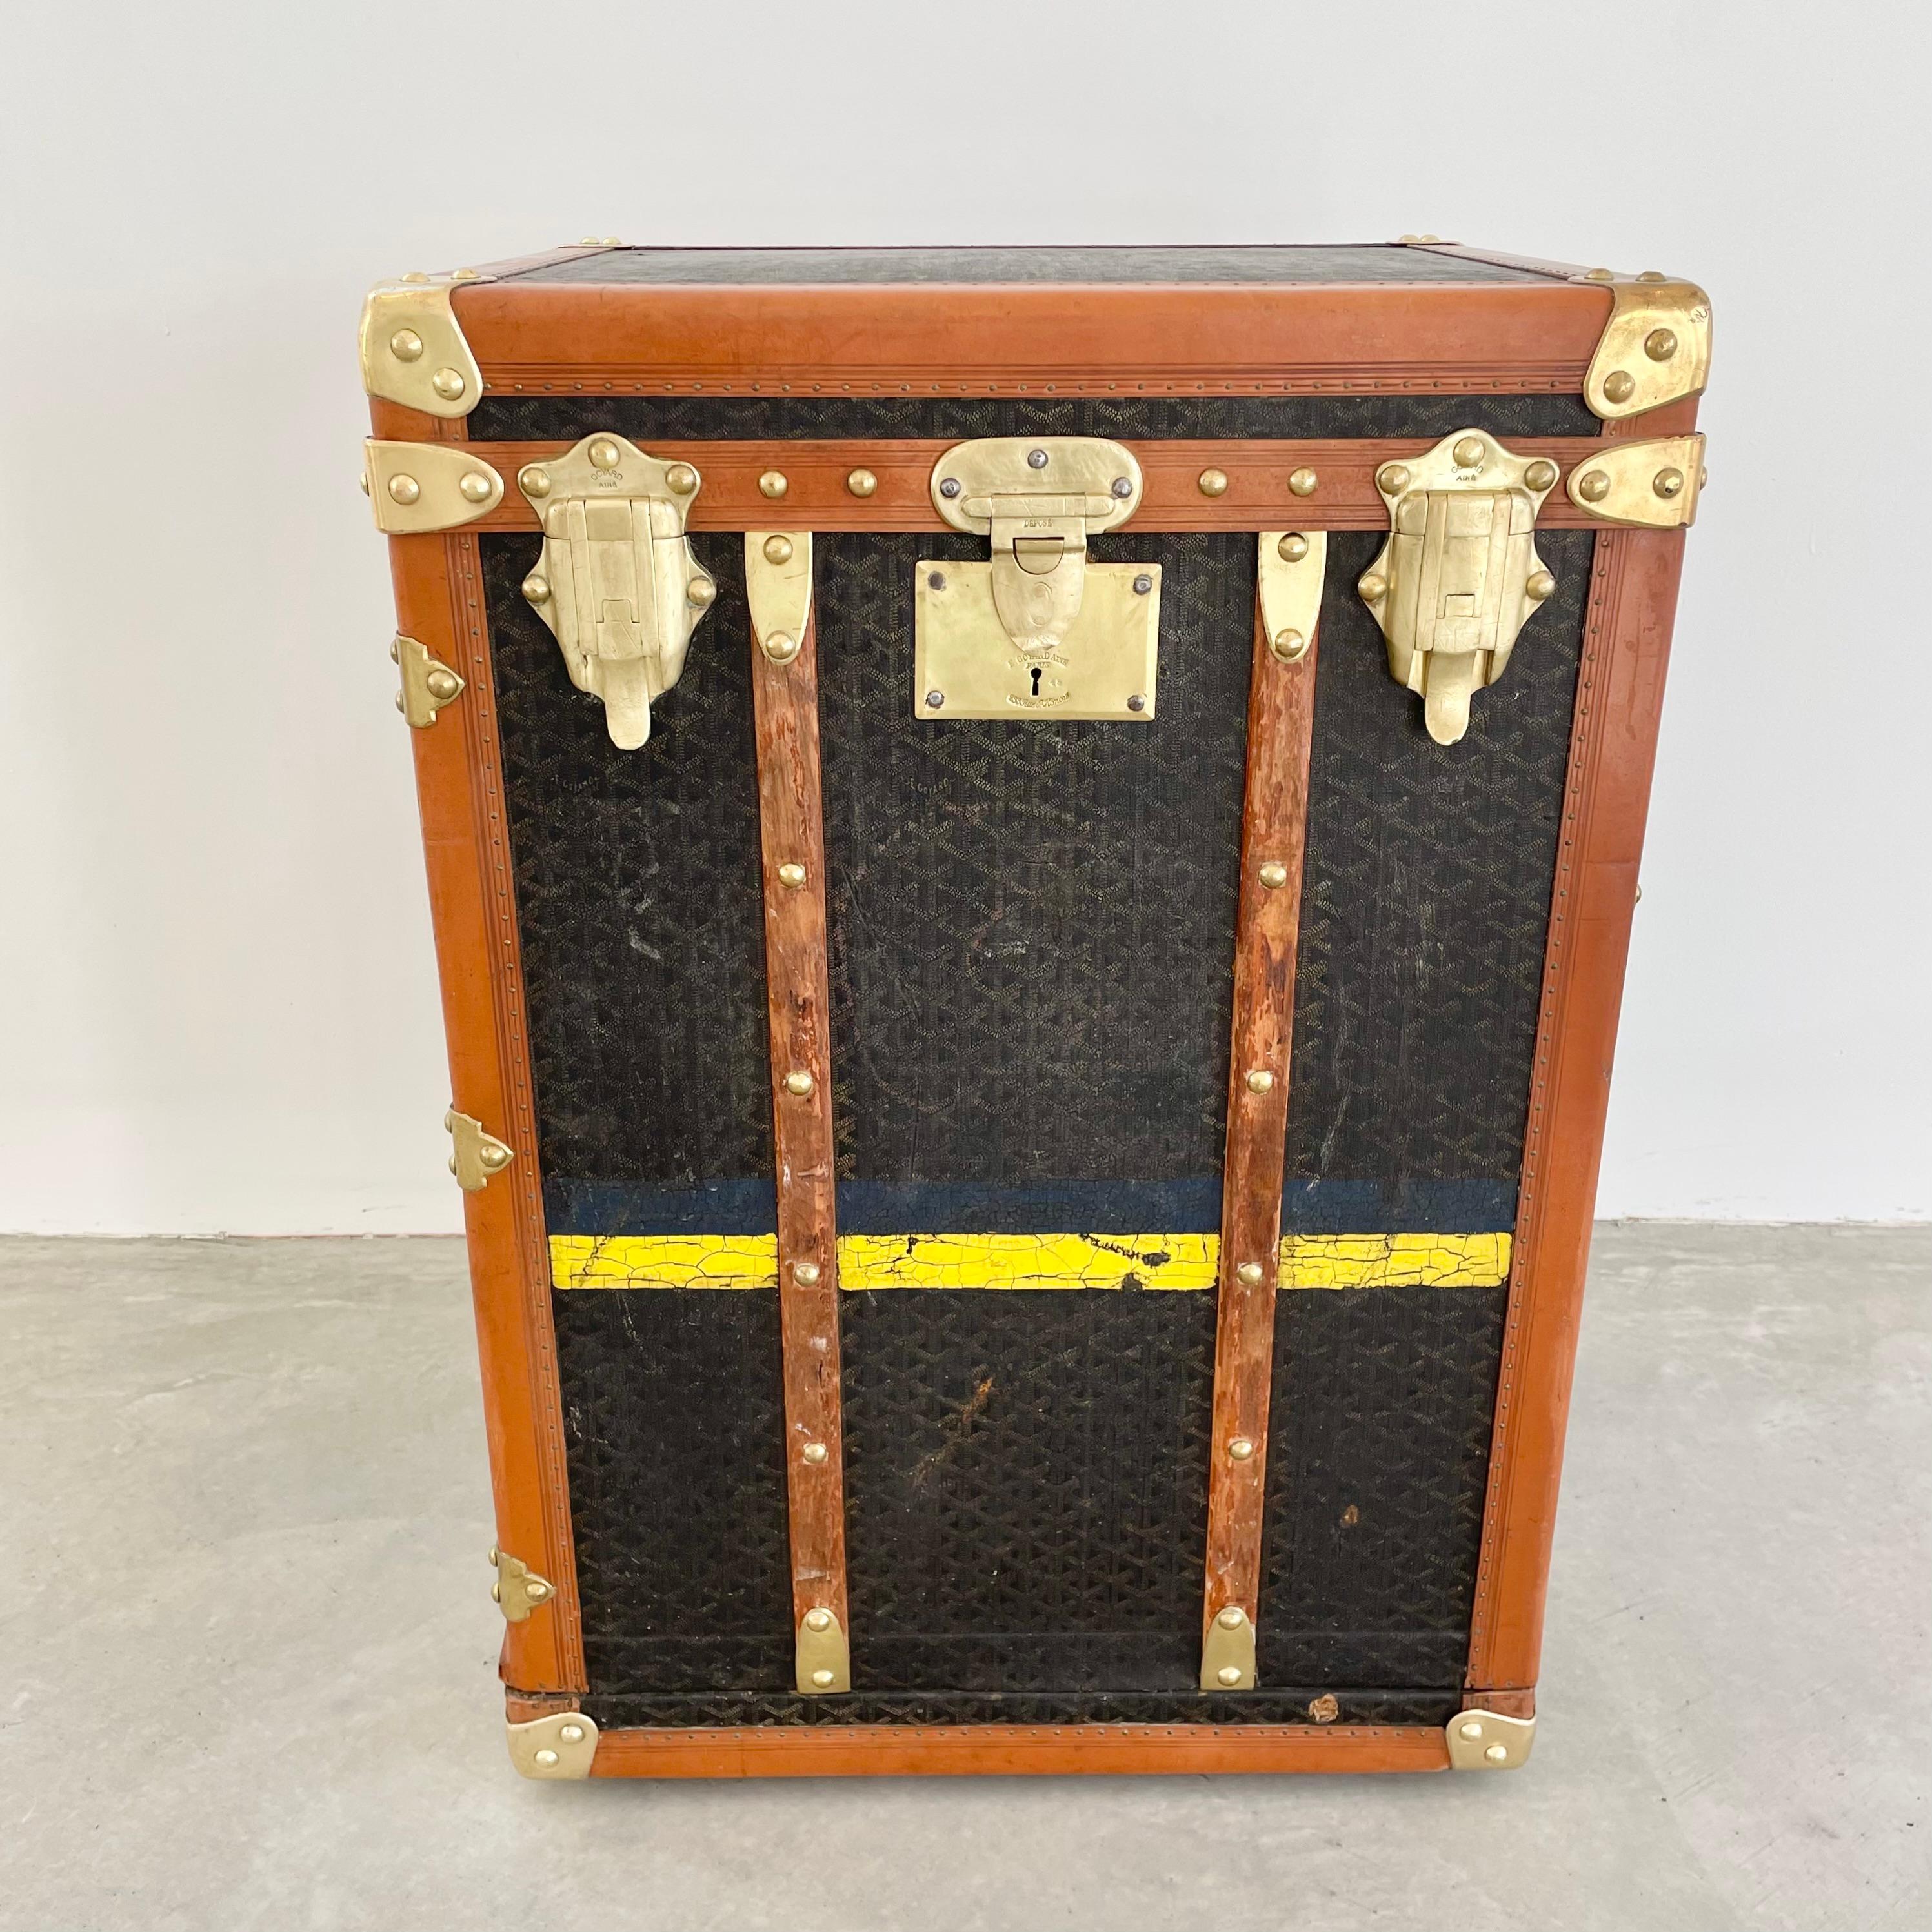 Classic vintage Goyard trunk. Made in the 1920s. Large wooden frame wrapped in the iconic Goyard canvas print with saddle leather and brass hardware as well as wooden supports on the front and back. Goyard branding engraved on the brass hardware